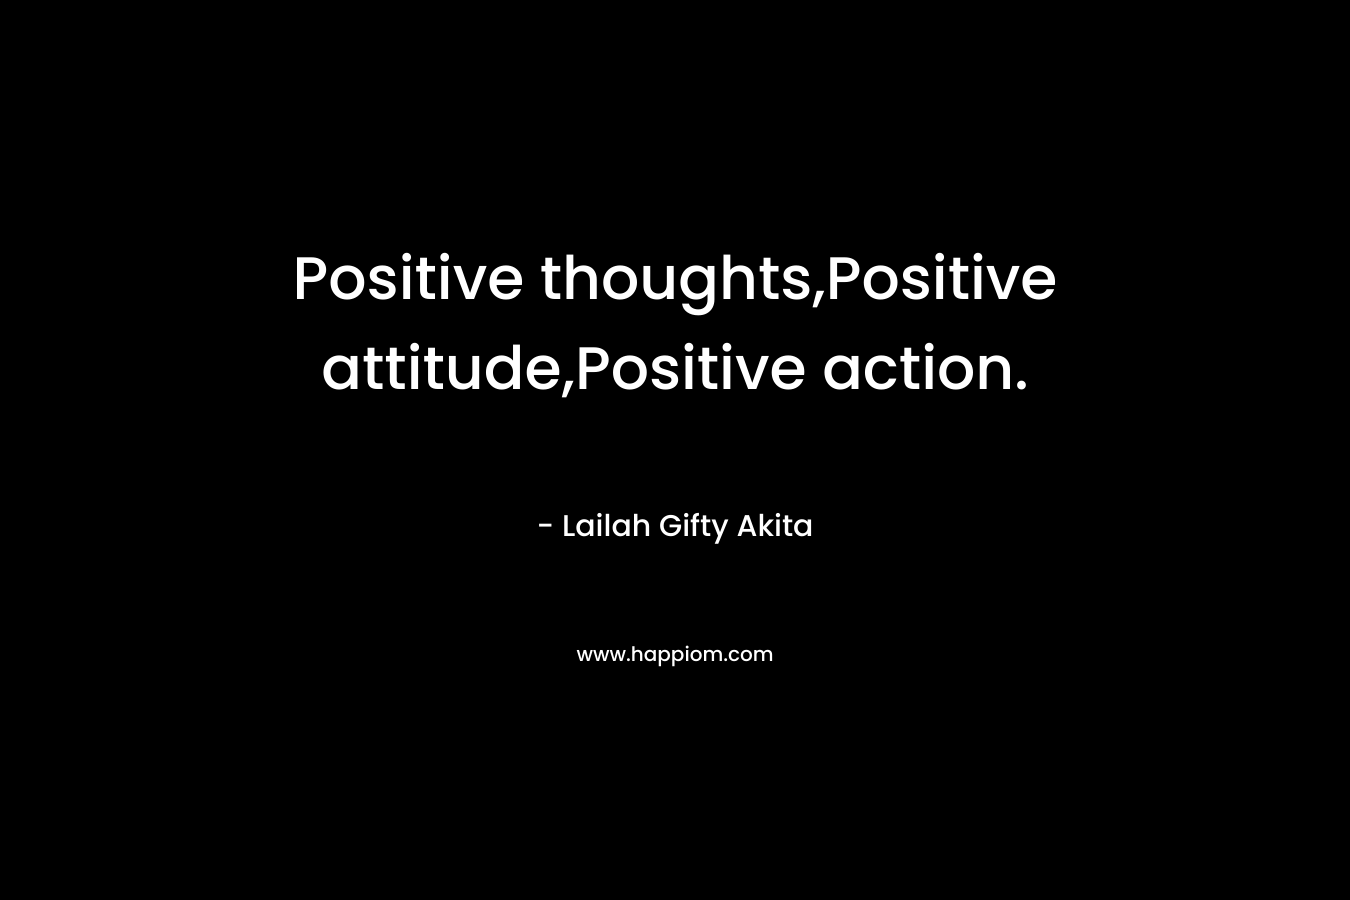 Positive thoughts,Positive attitude,Positive action.